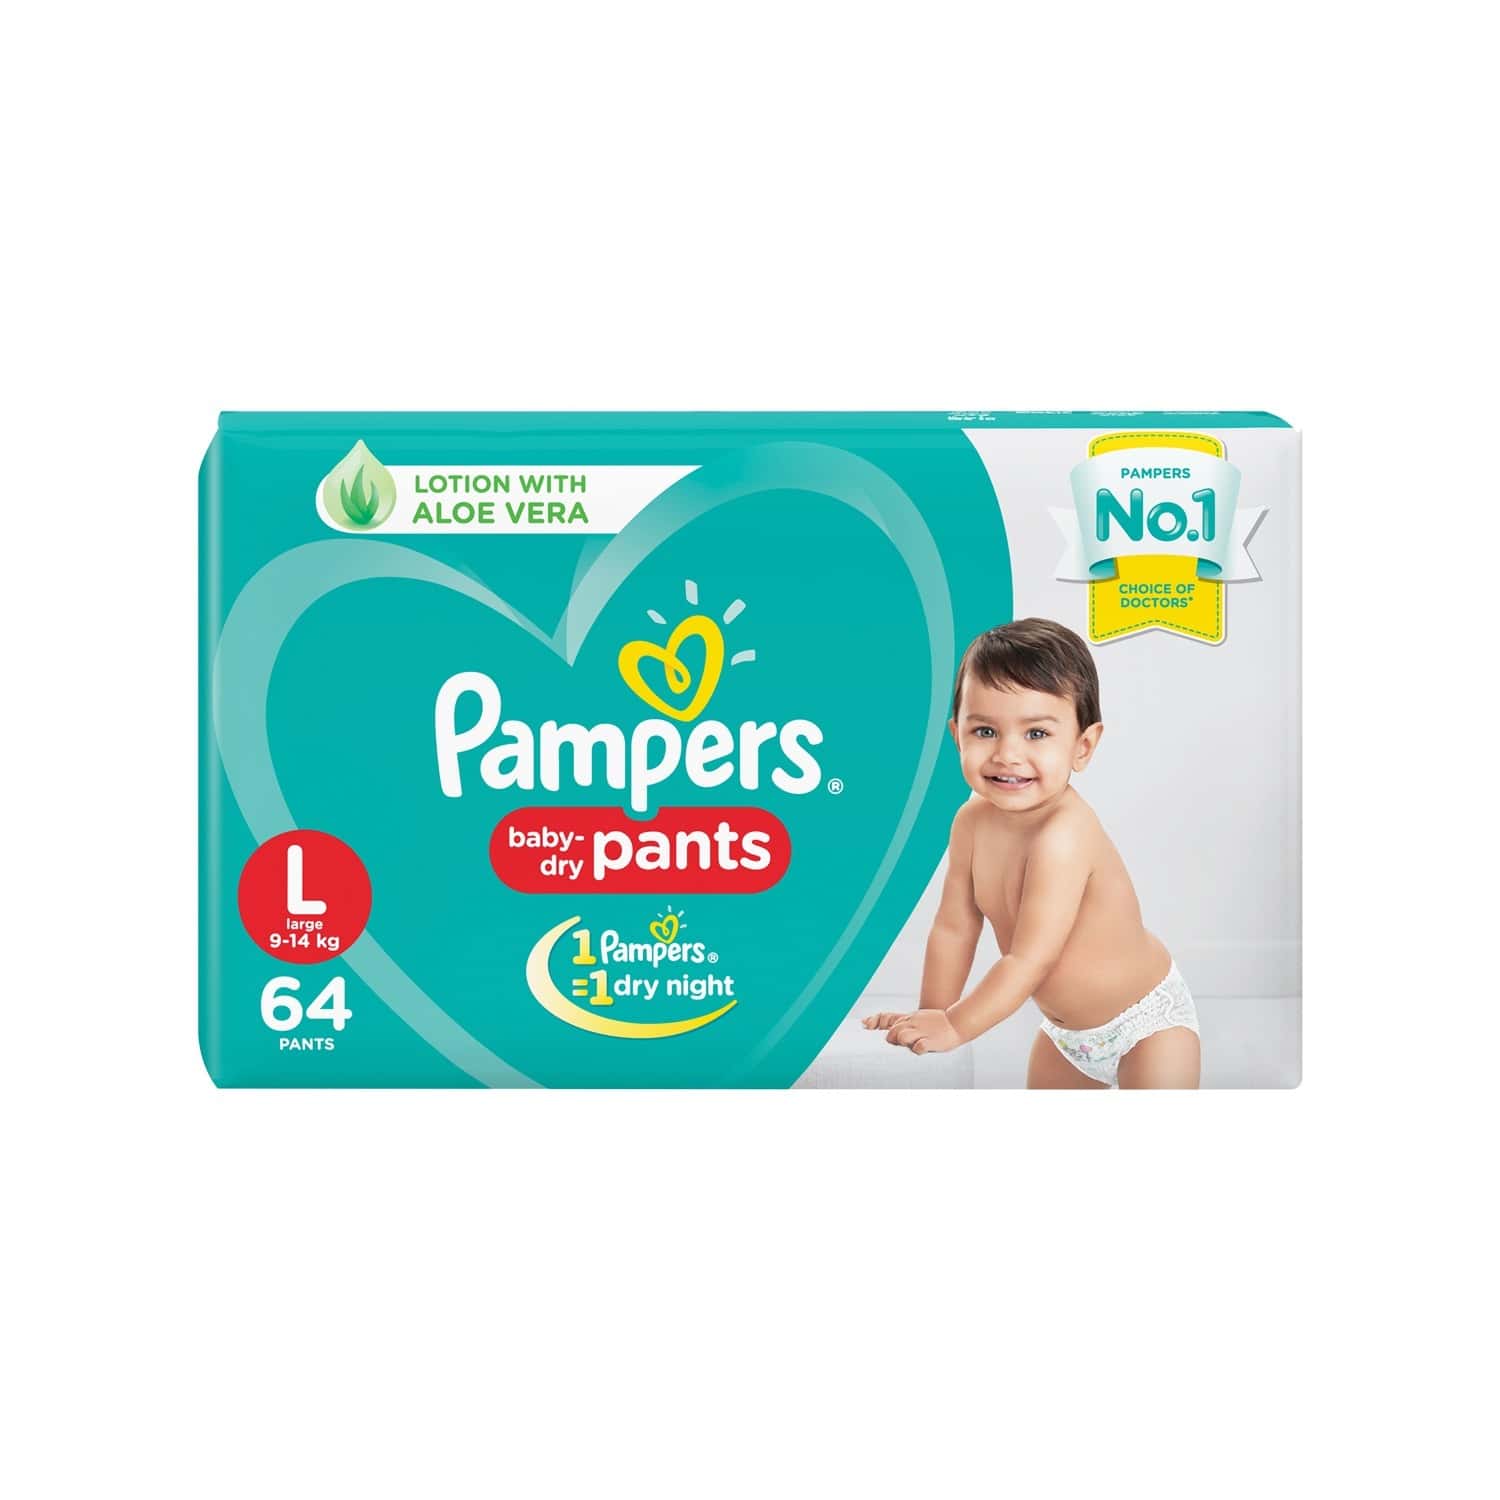 Pampers Baby Pant Diapers L64Mrp 1049 Size Large